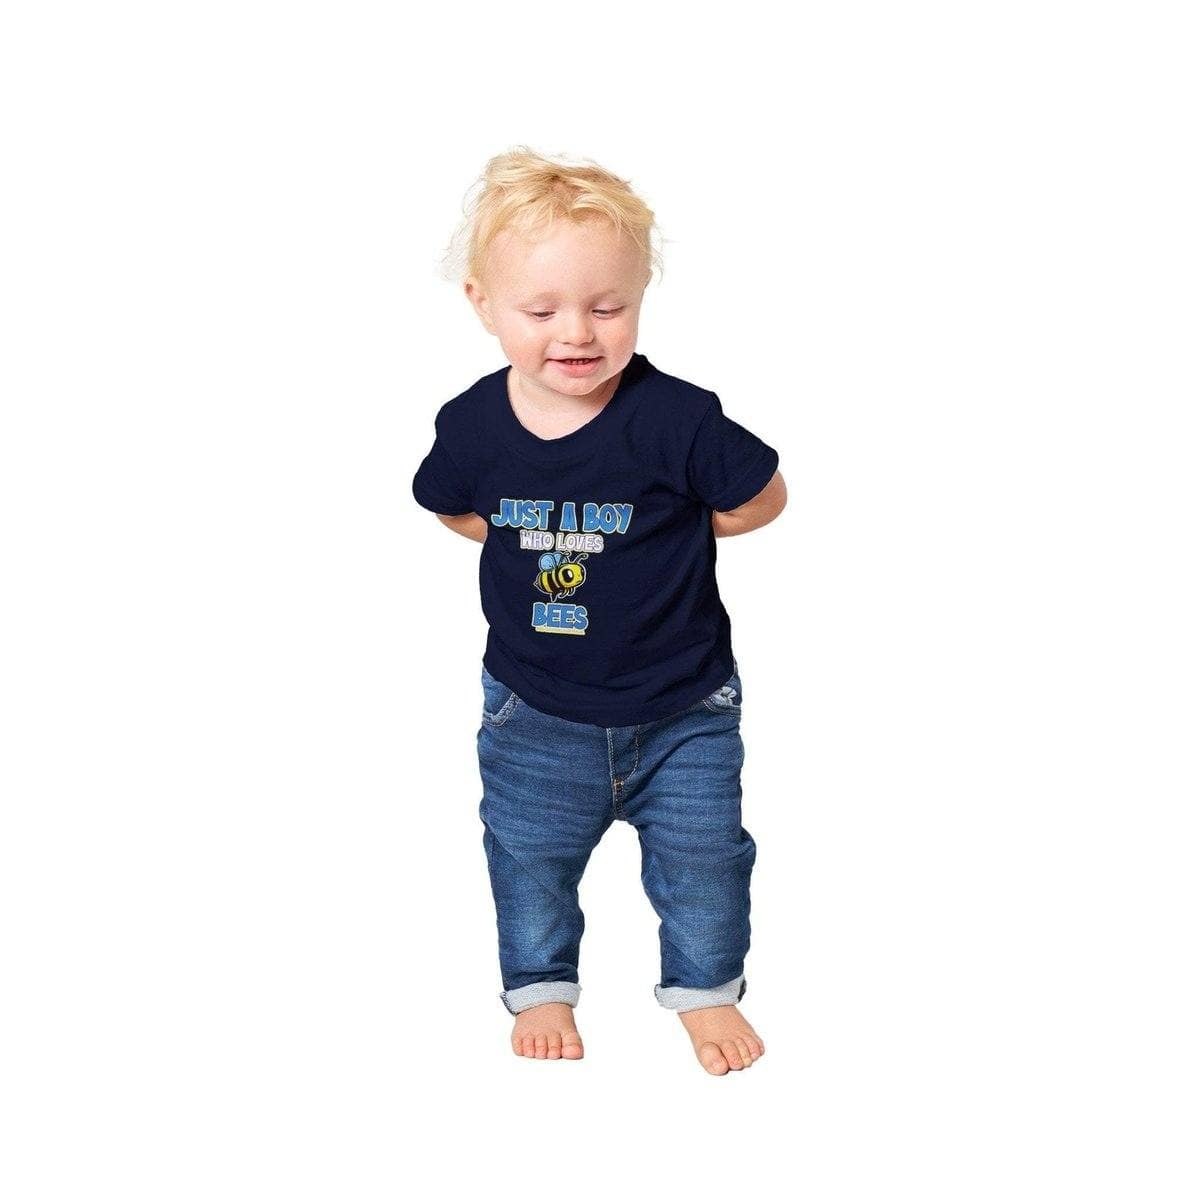 Just a Boy who loves bees T-Shirt - Baby Bee T-Shirts- Classic Baby Crewneck T-shirt Australia Online Color Navy / 6m